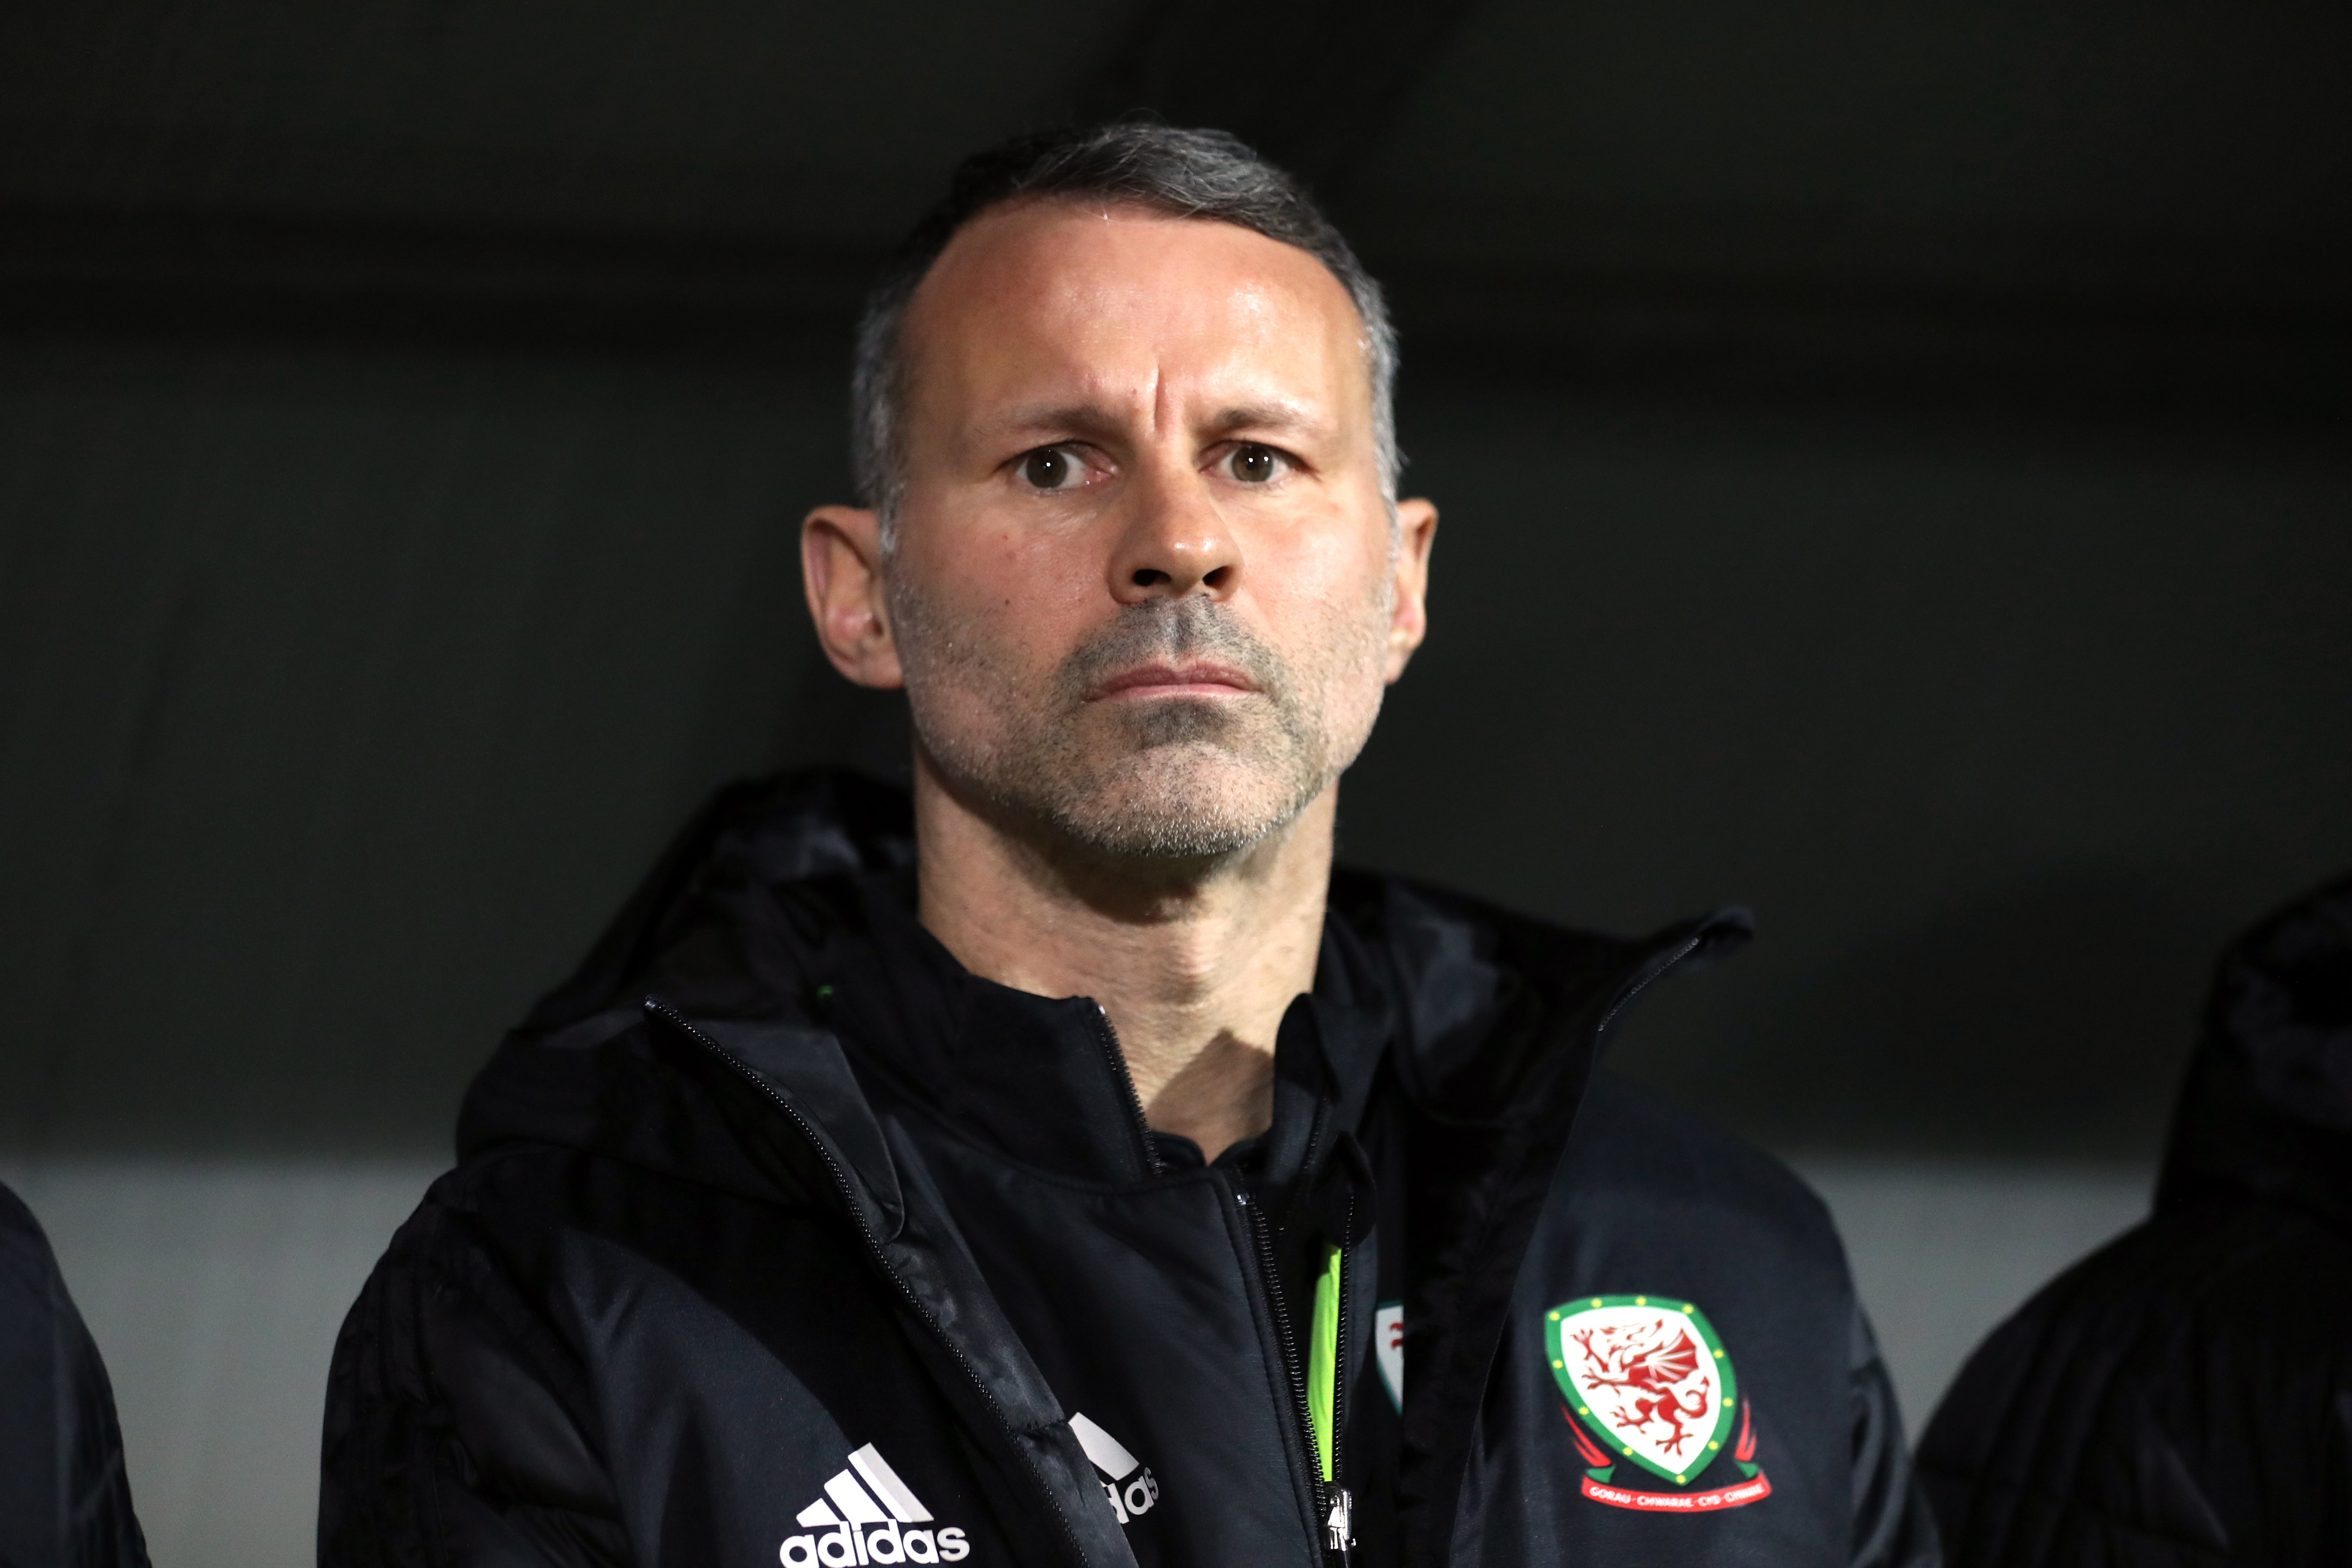 Ryan Giggs stepped down as Wales manager in June